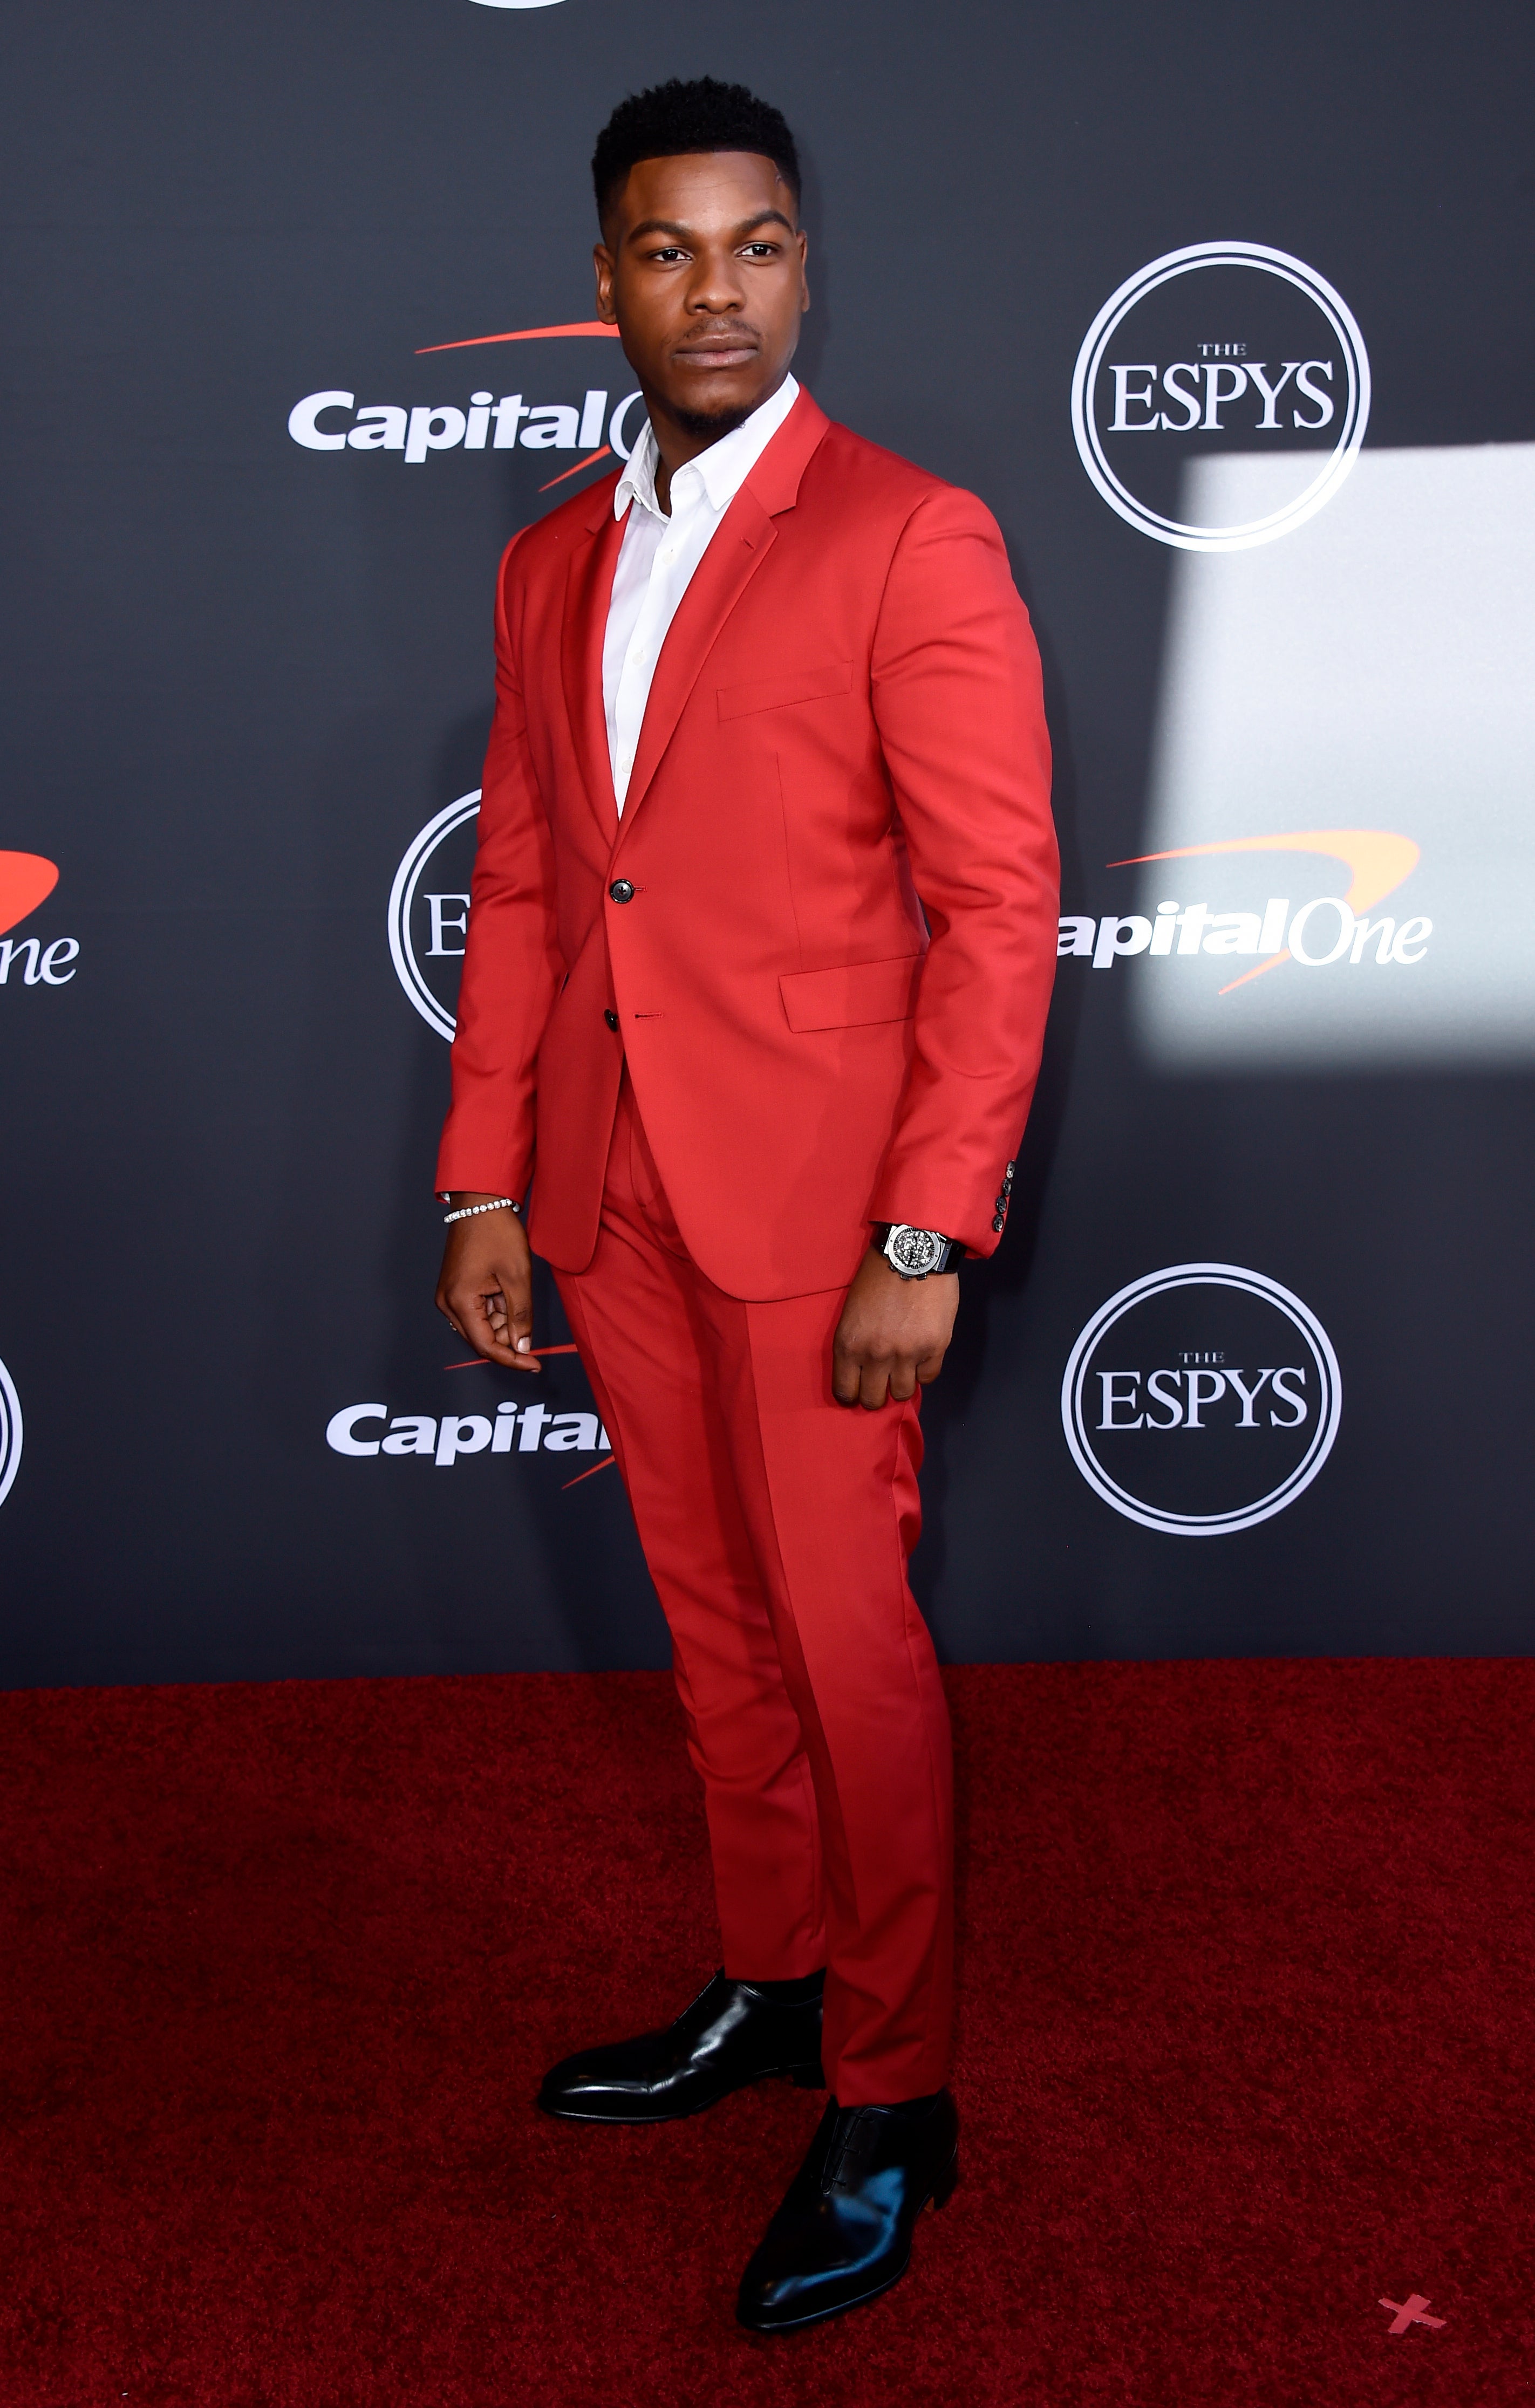 Boyega wore a blood red suit with an open white collar and later presented an award alongside rapper Lil Wayne (Jordan Strauss/AP)